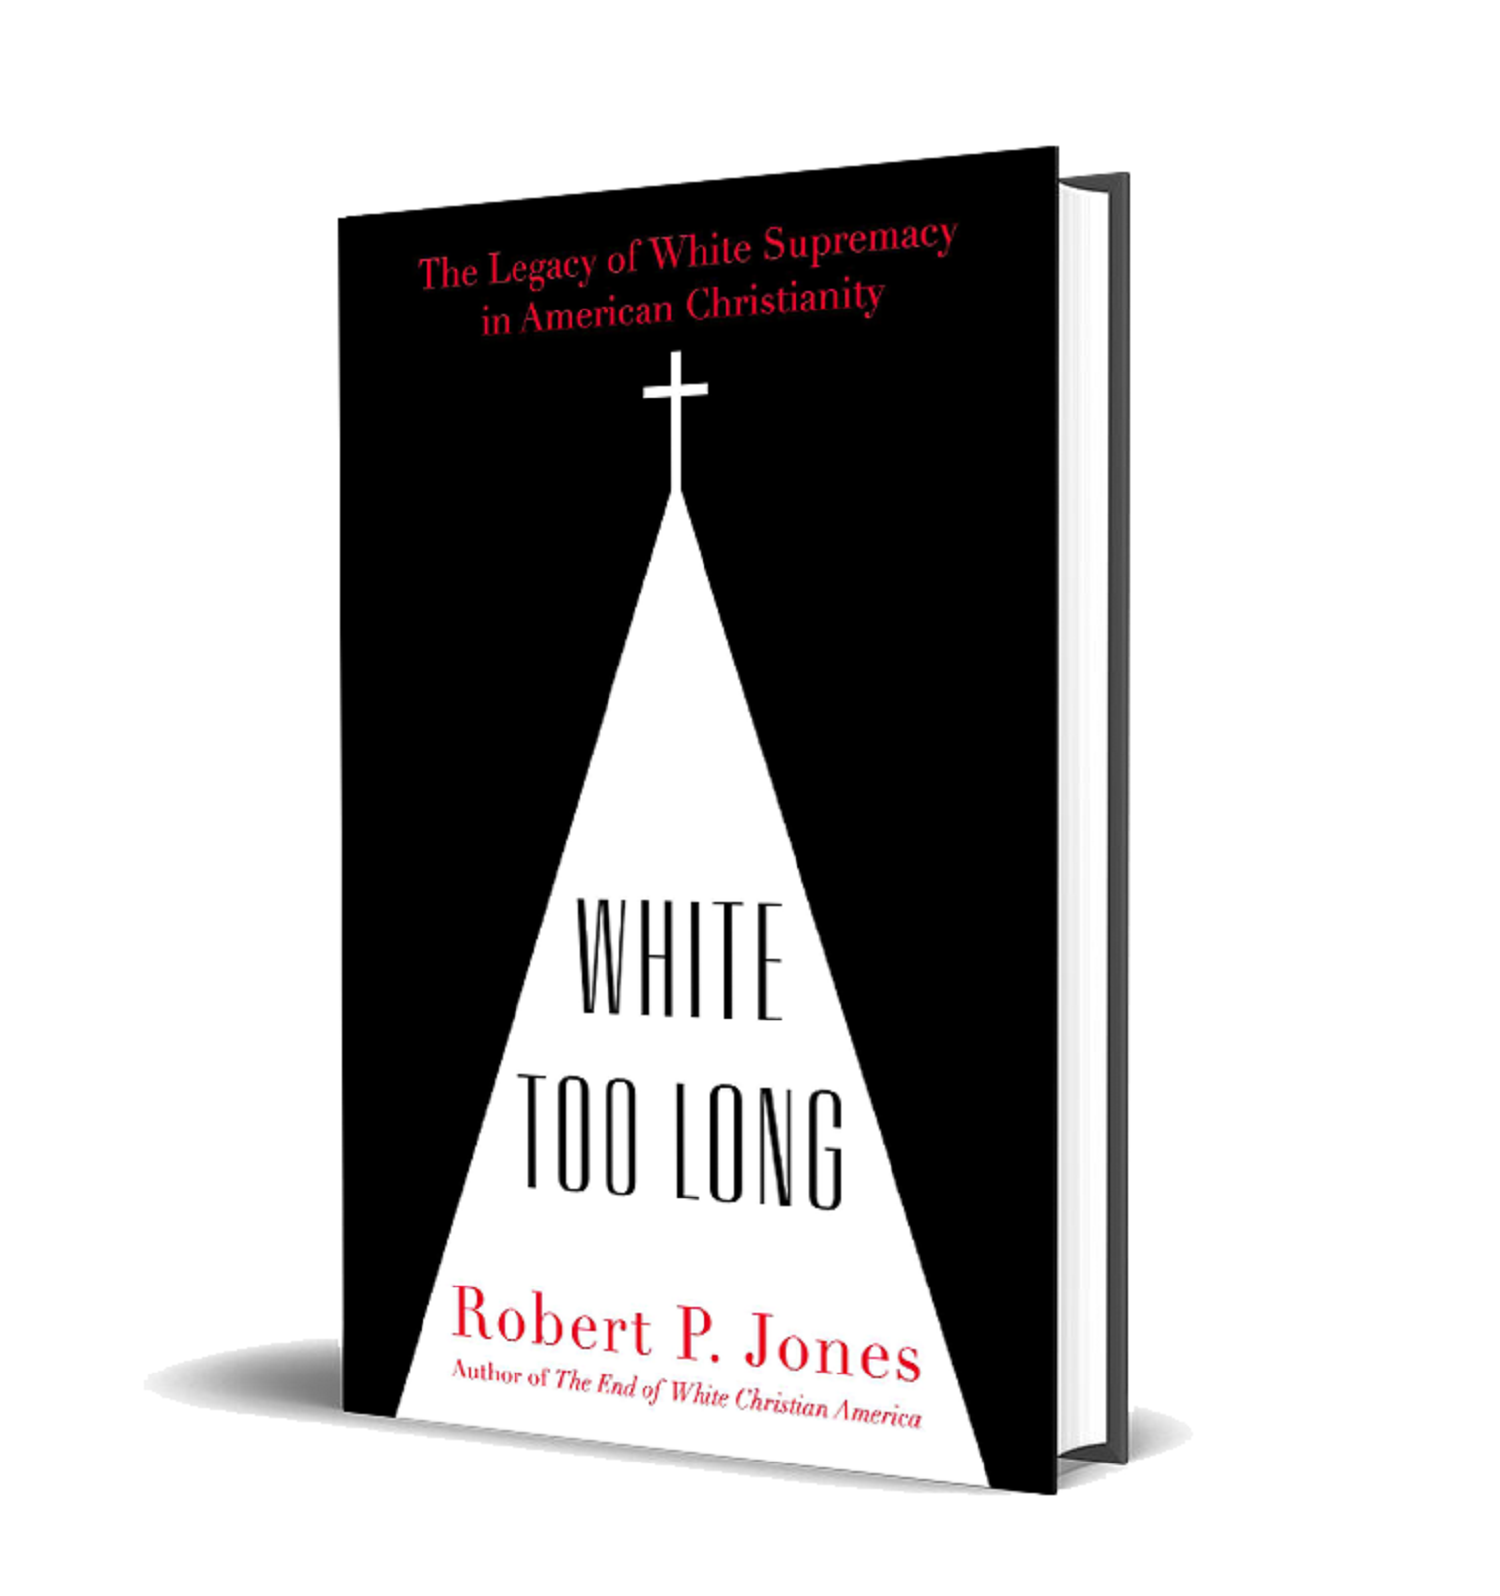 White Too Long book cover